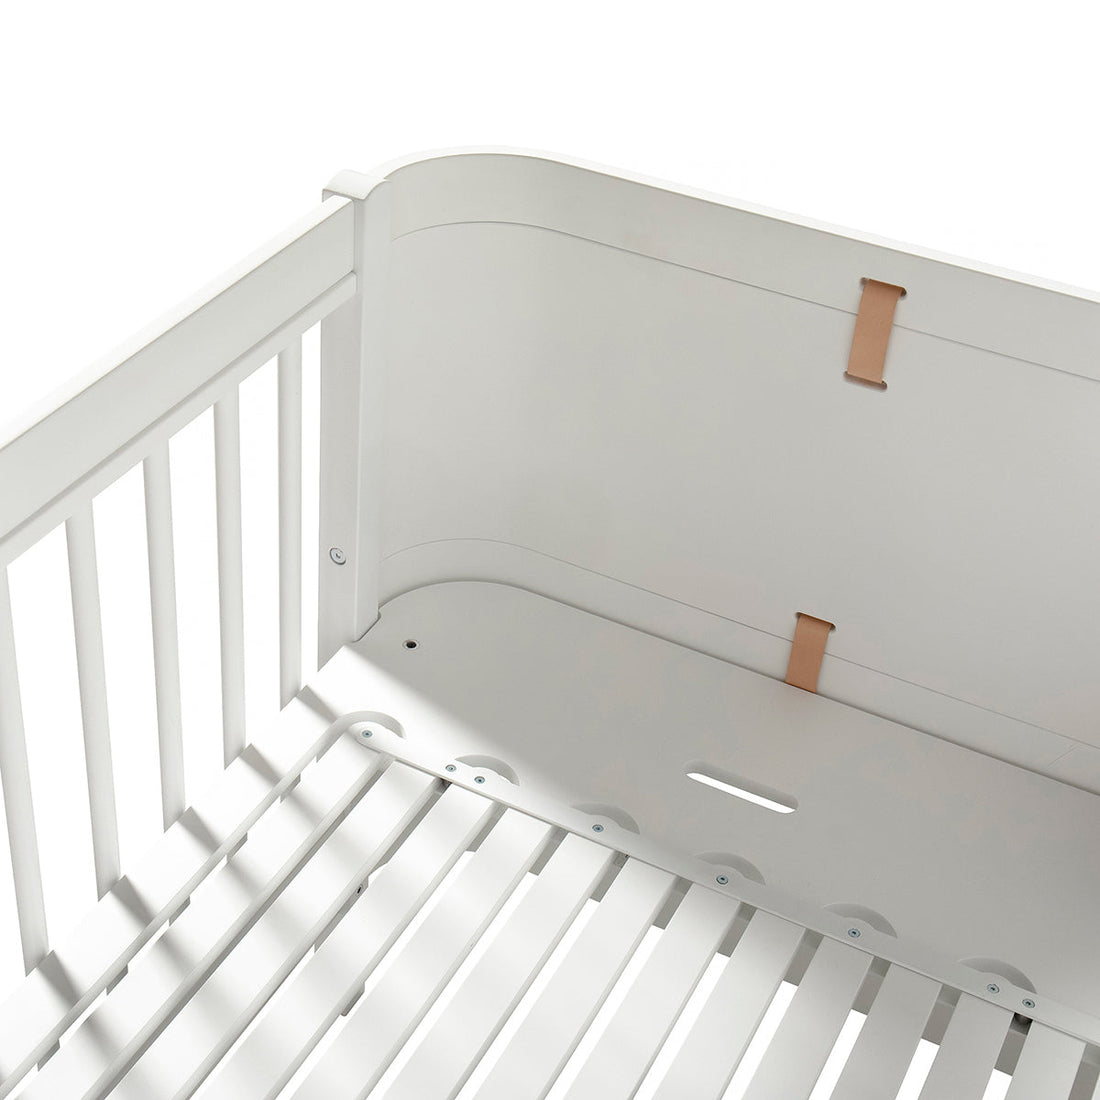 Oliver Furniture Wood Mini+ Cot Bed (Without Junior Conversion Kit) - White (Pre-Order; Est. Delivery in 6-10 Weeks)